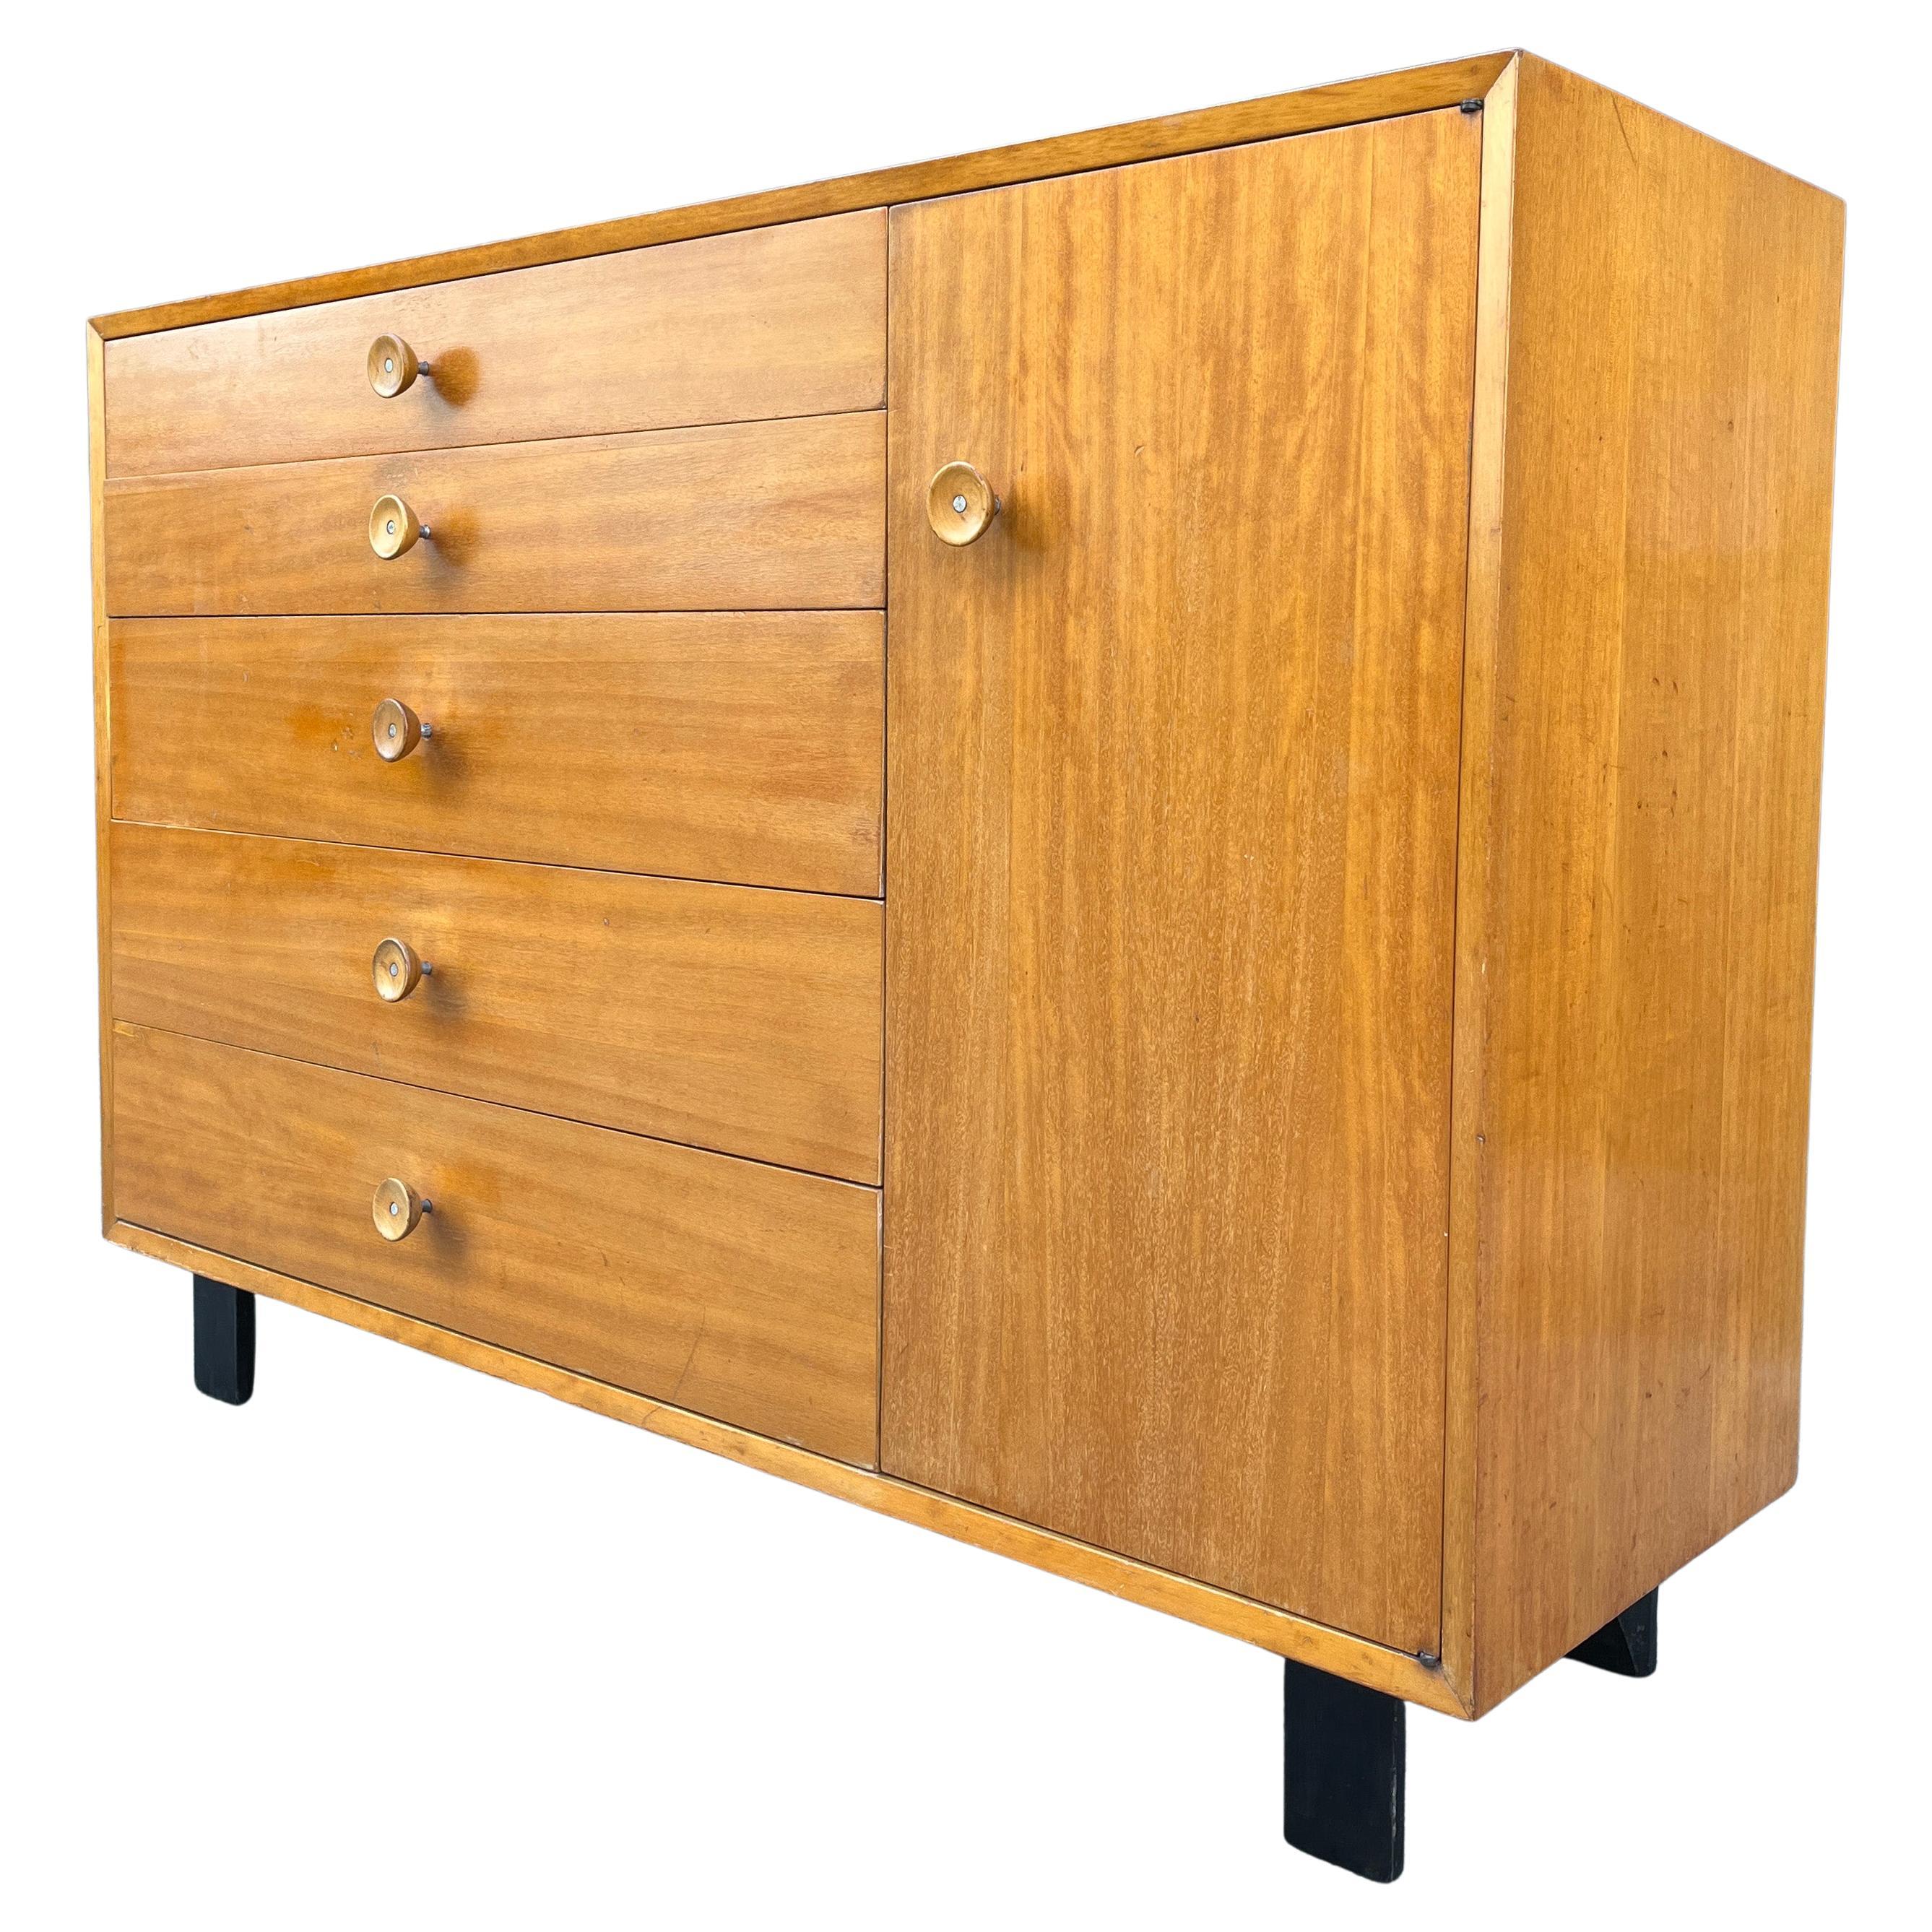 George Nelson designed this chest or cabinet, model #4621, as part of Herman Miller’s modular basic storage components. A five-drawer Primavera wood dresser with side cabinet containing two adjustable shelves. Original foil George Nelson-Herman